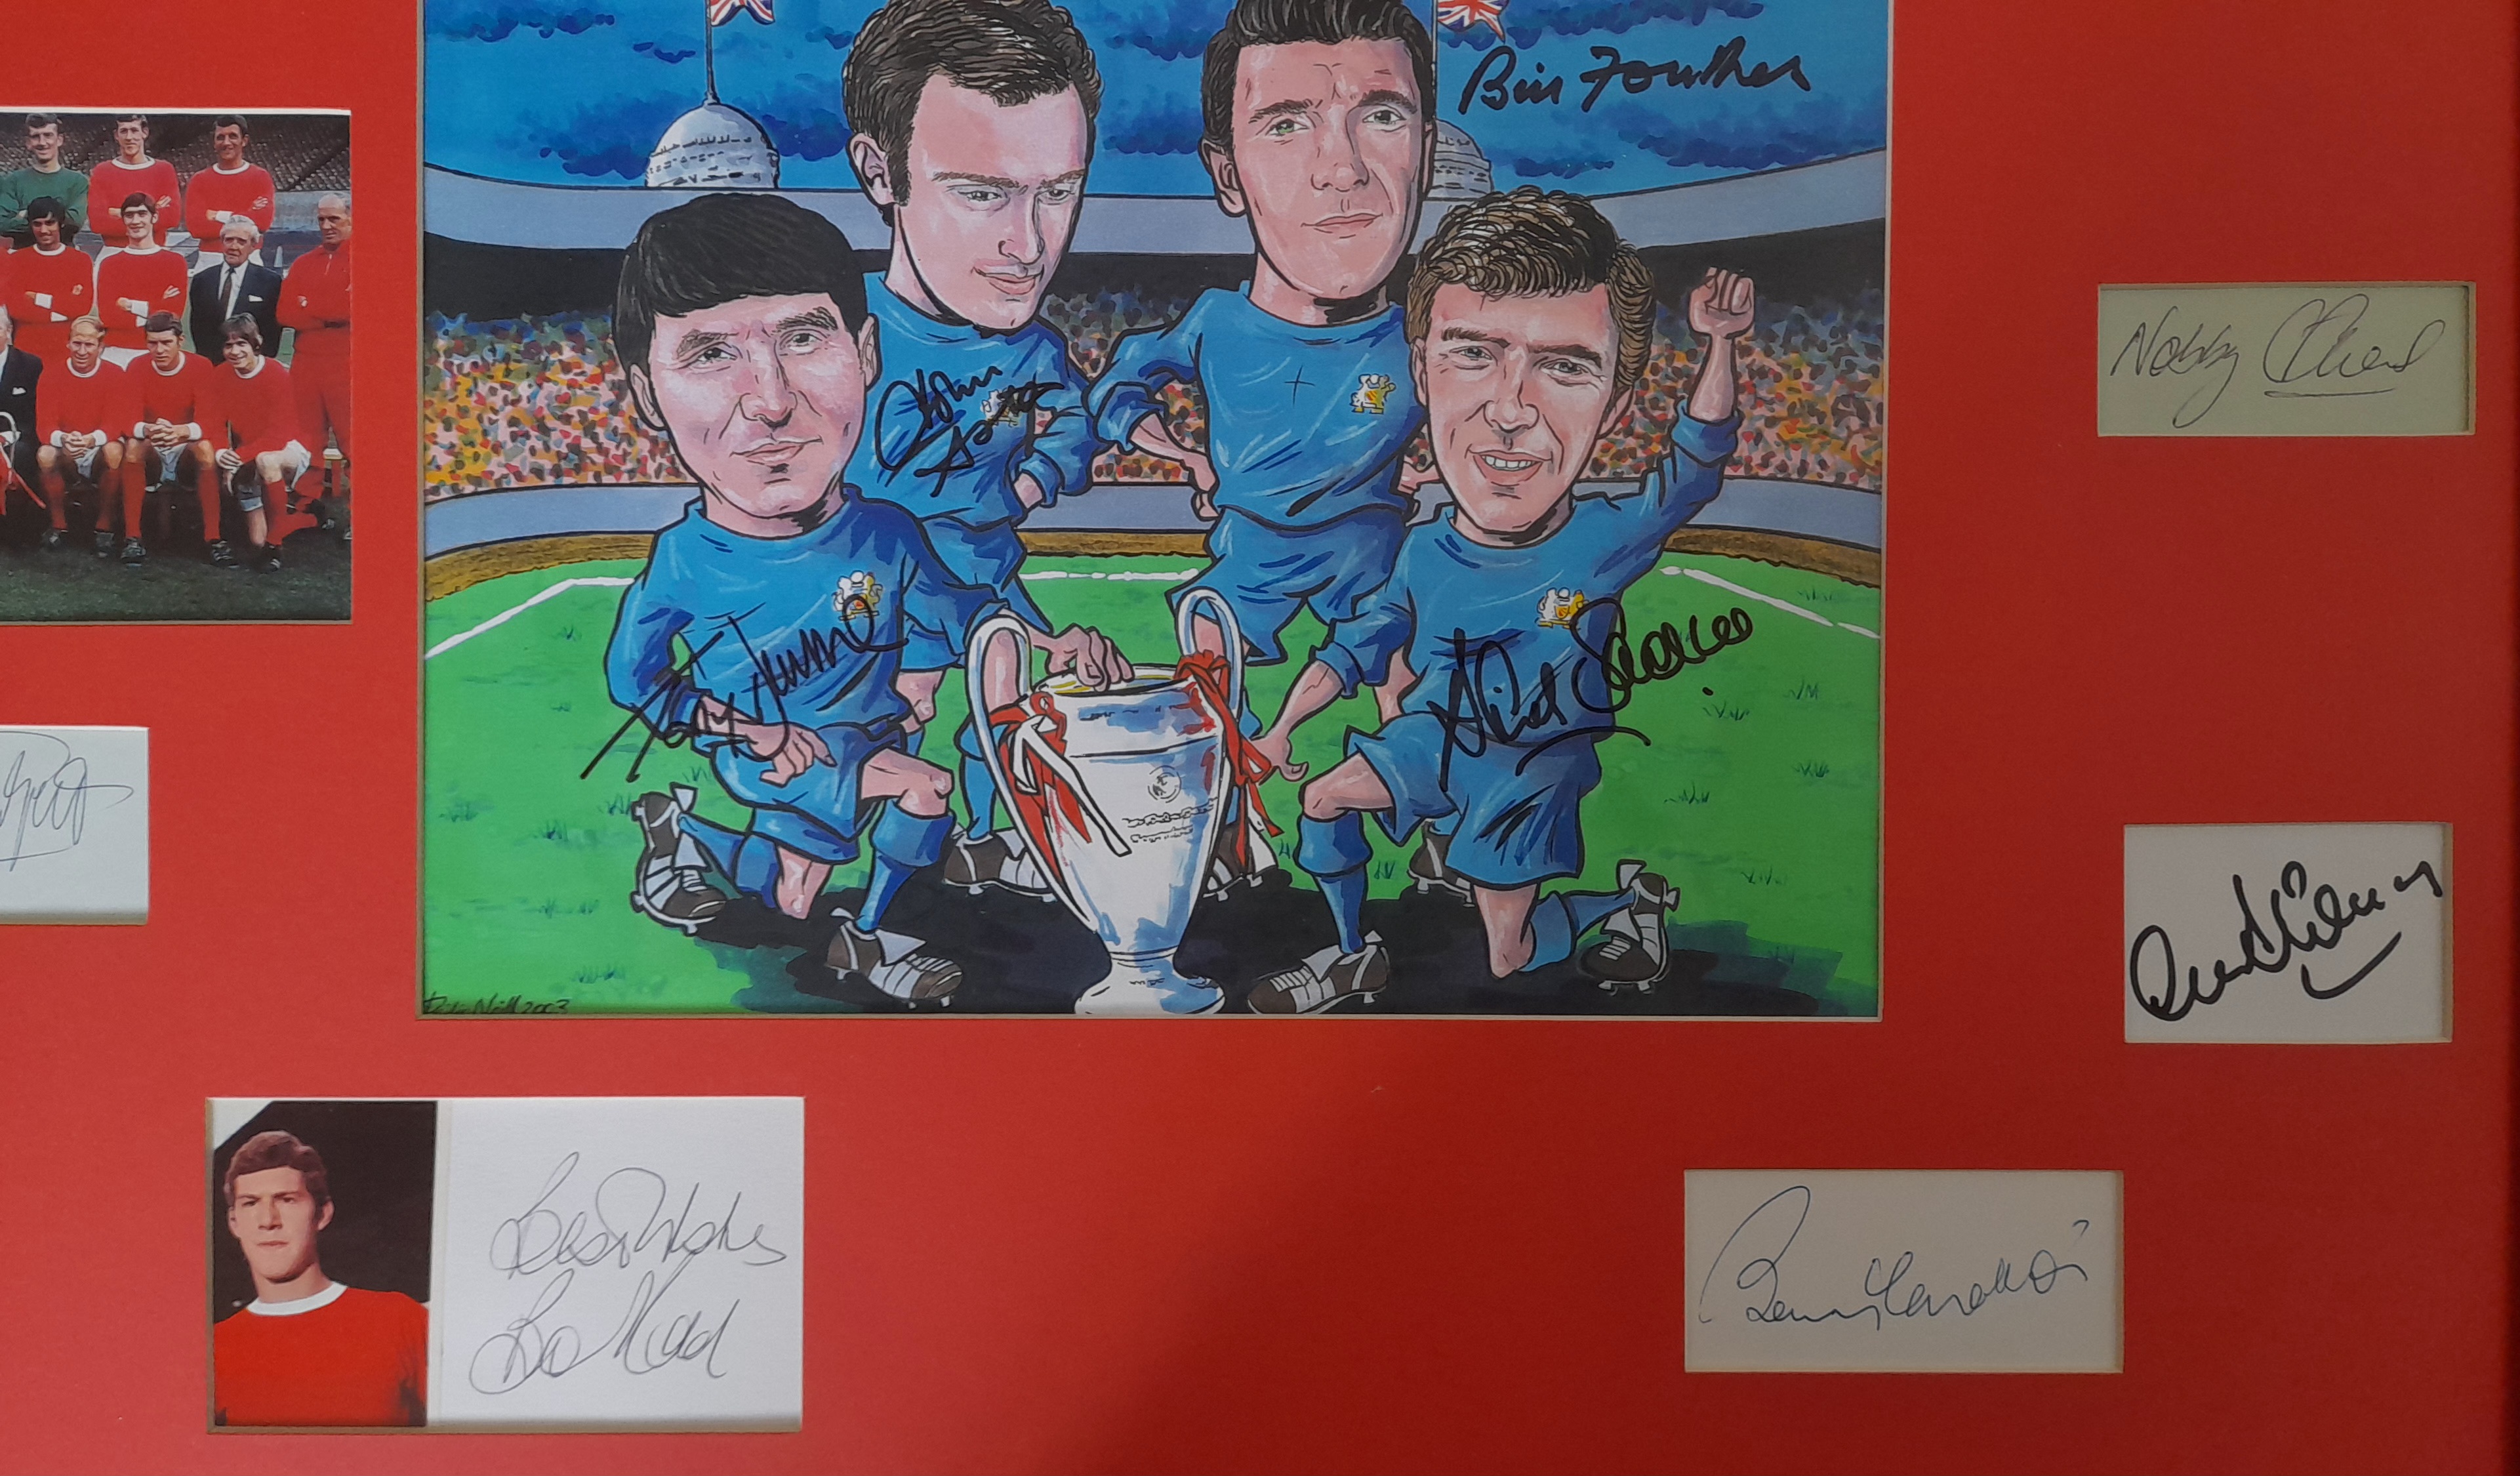 MANCHESTER UNITED 1968 EUROPEAN CUP WINNERS AUTOGRAPHED DISPLAY - Image 2 of 6